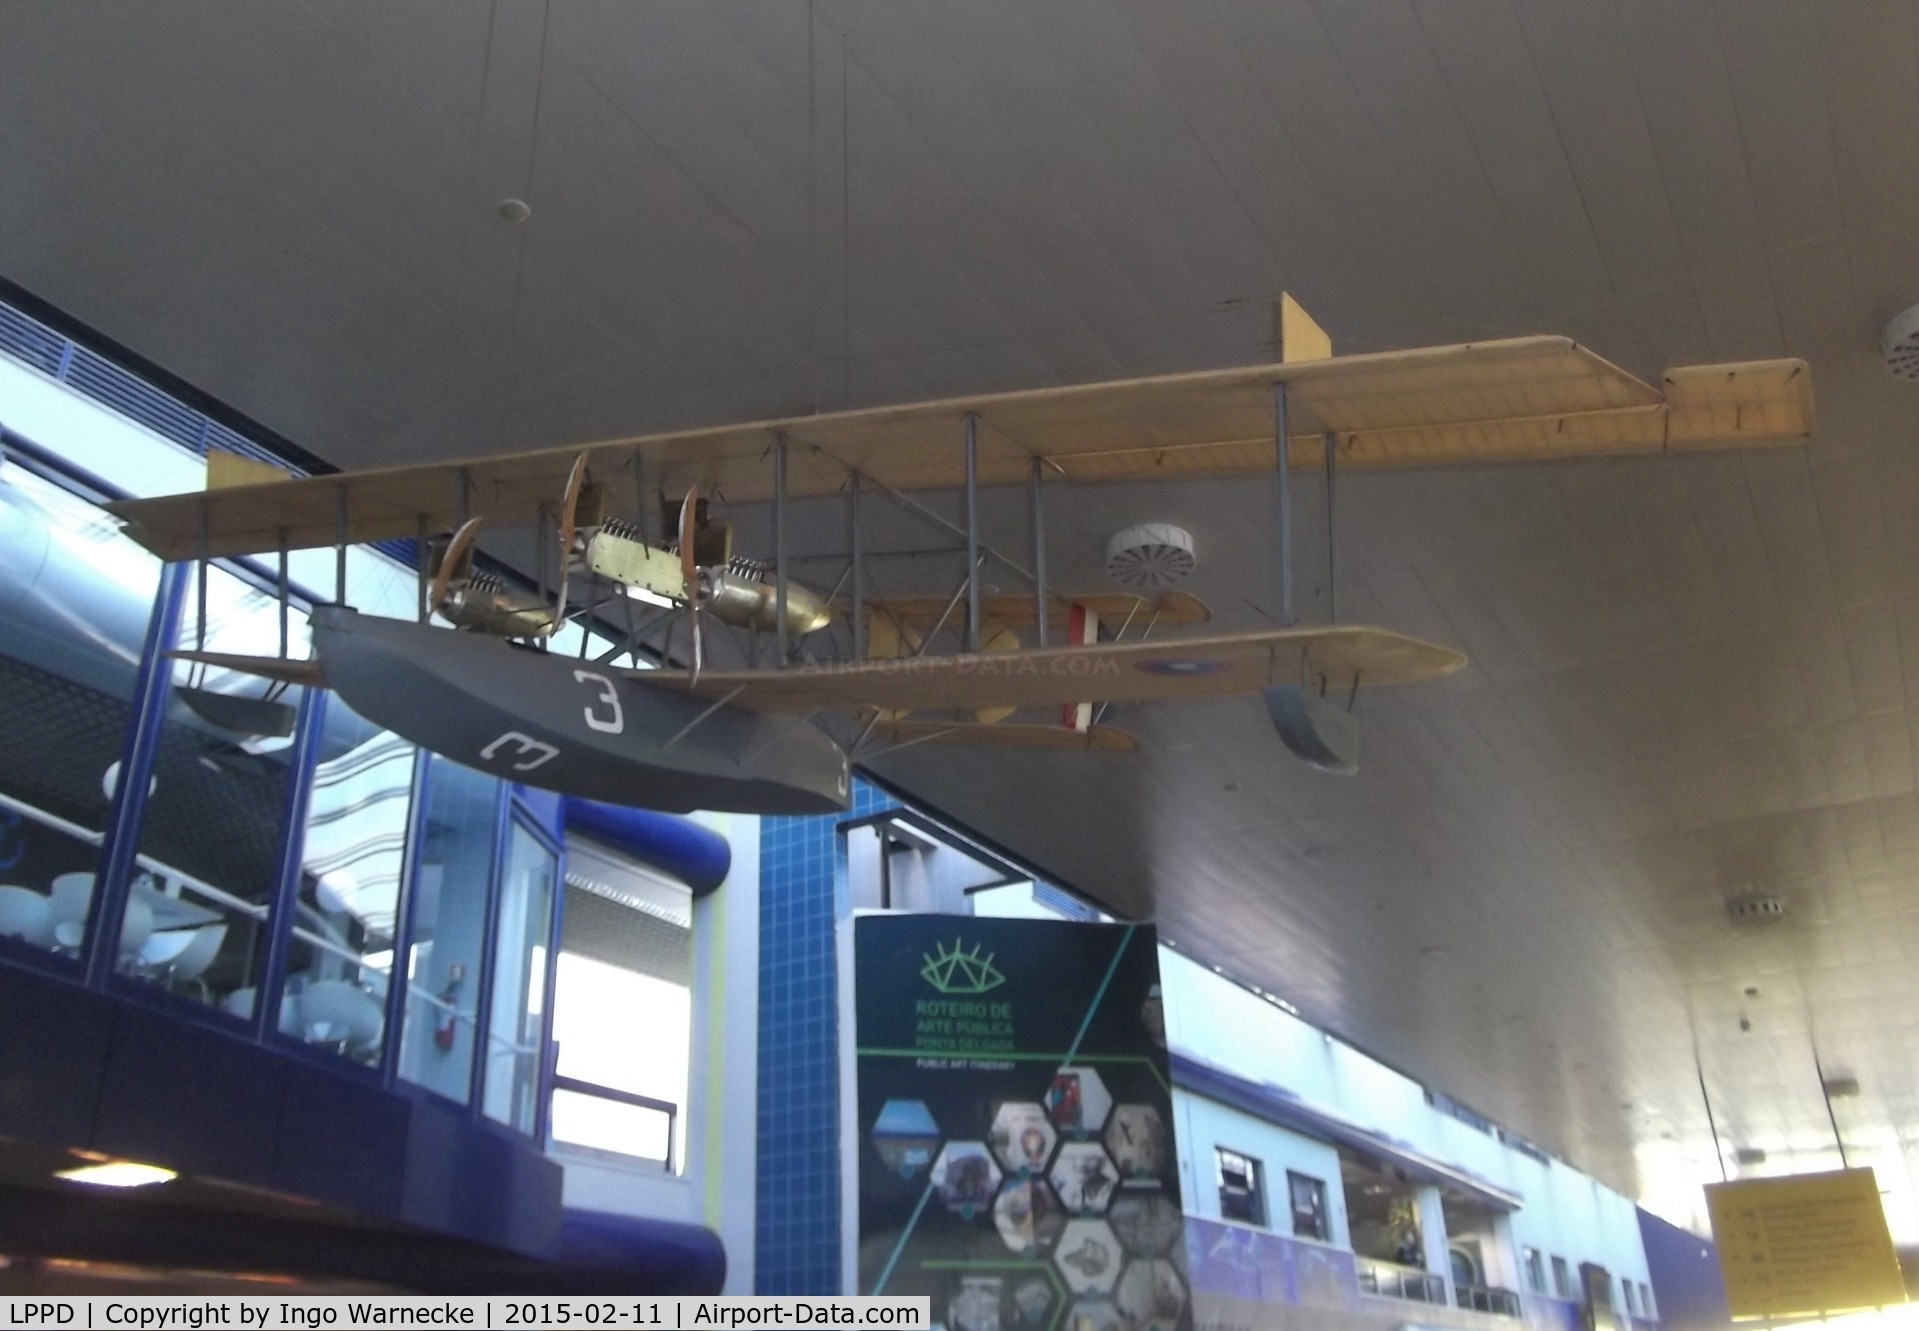 João Paulo II Airport, Ponta Delgada, São Miguel Island Portugal (LPPD) - large model of Curtiss NC-3 (had to land close to the Azores and sailed to Ponta Delgada in 1919 on the first transatlantic flight attempt) inside the terminal at Ponta Delgada airport